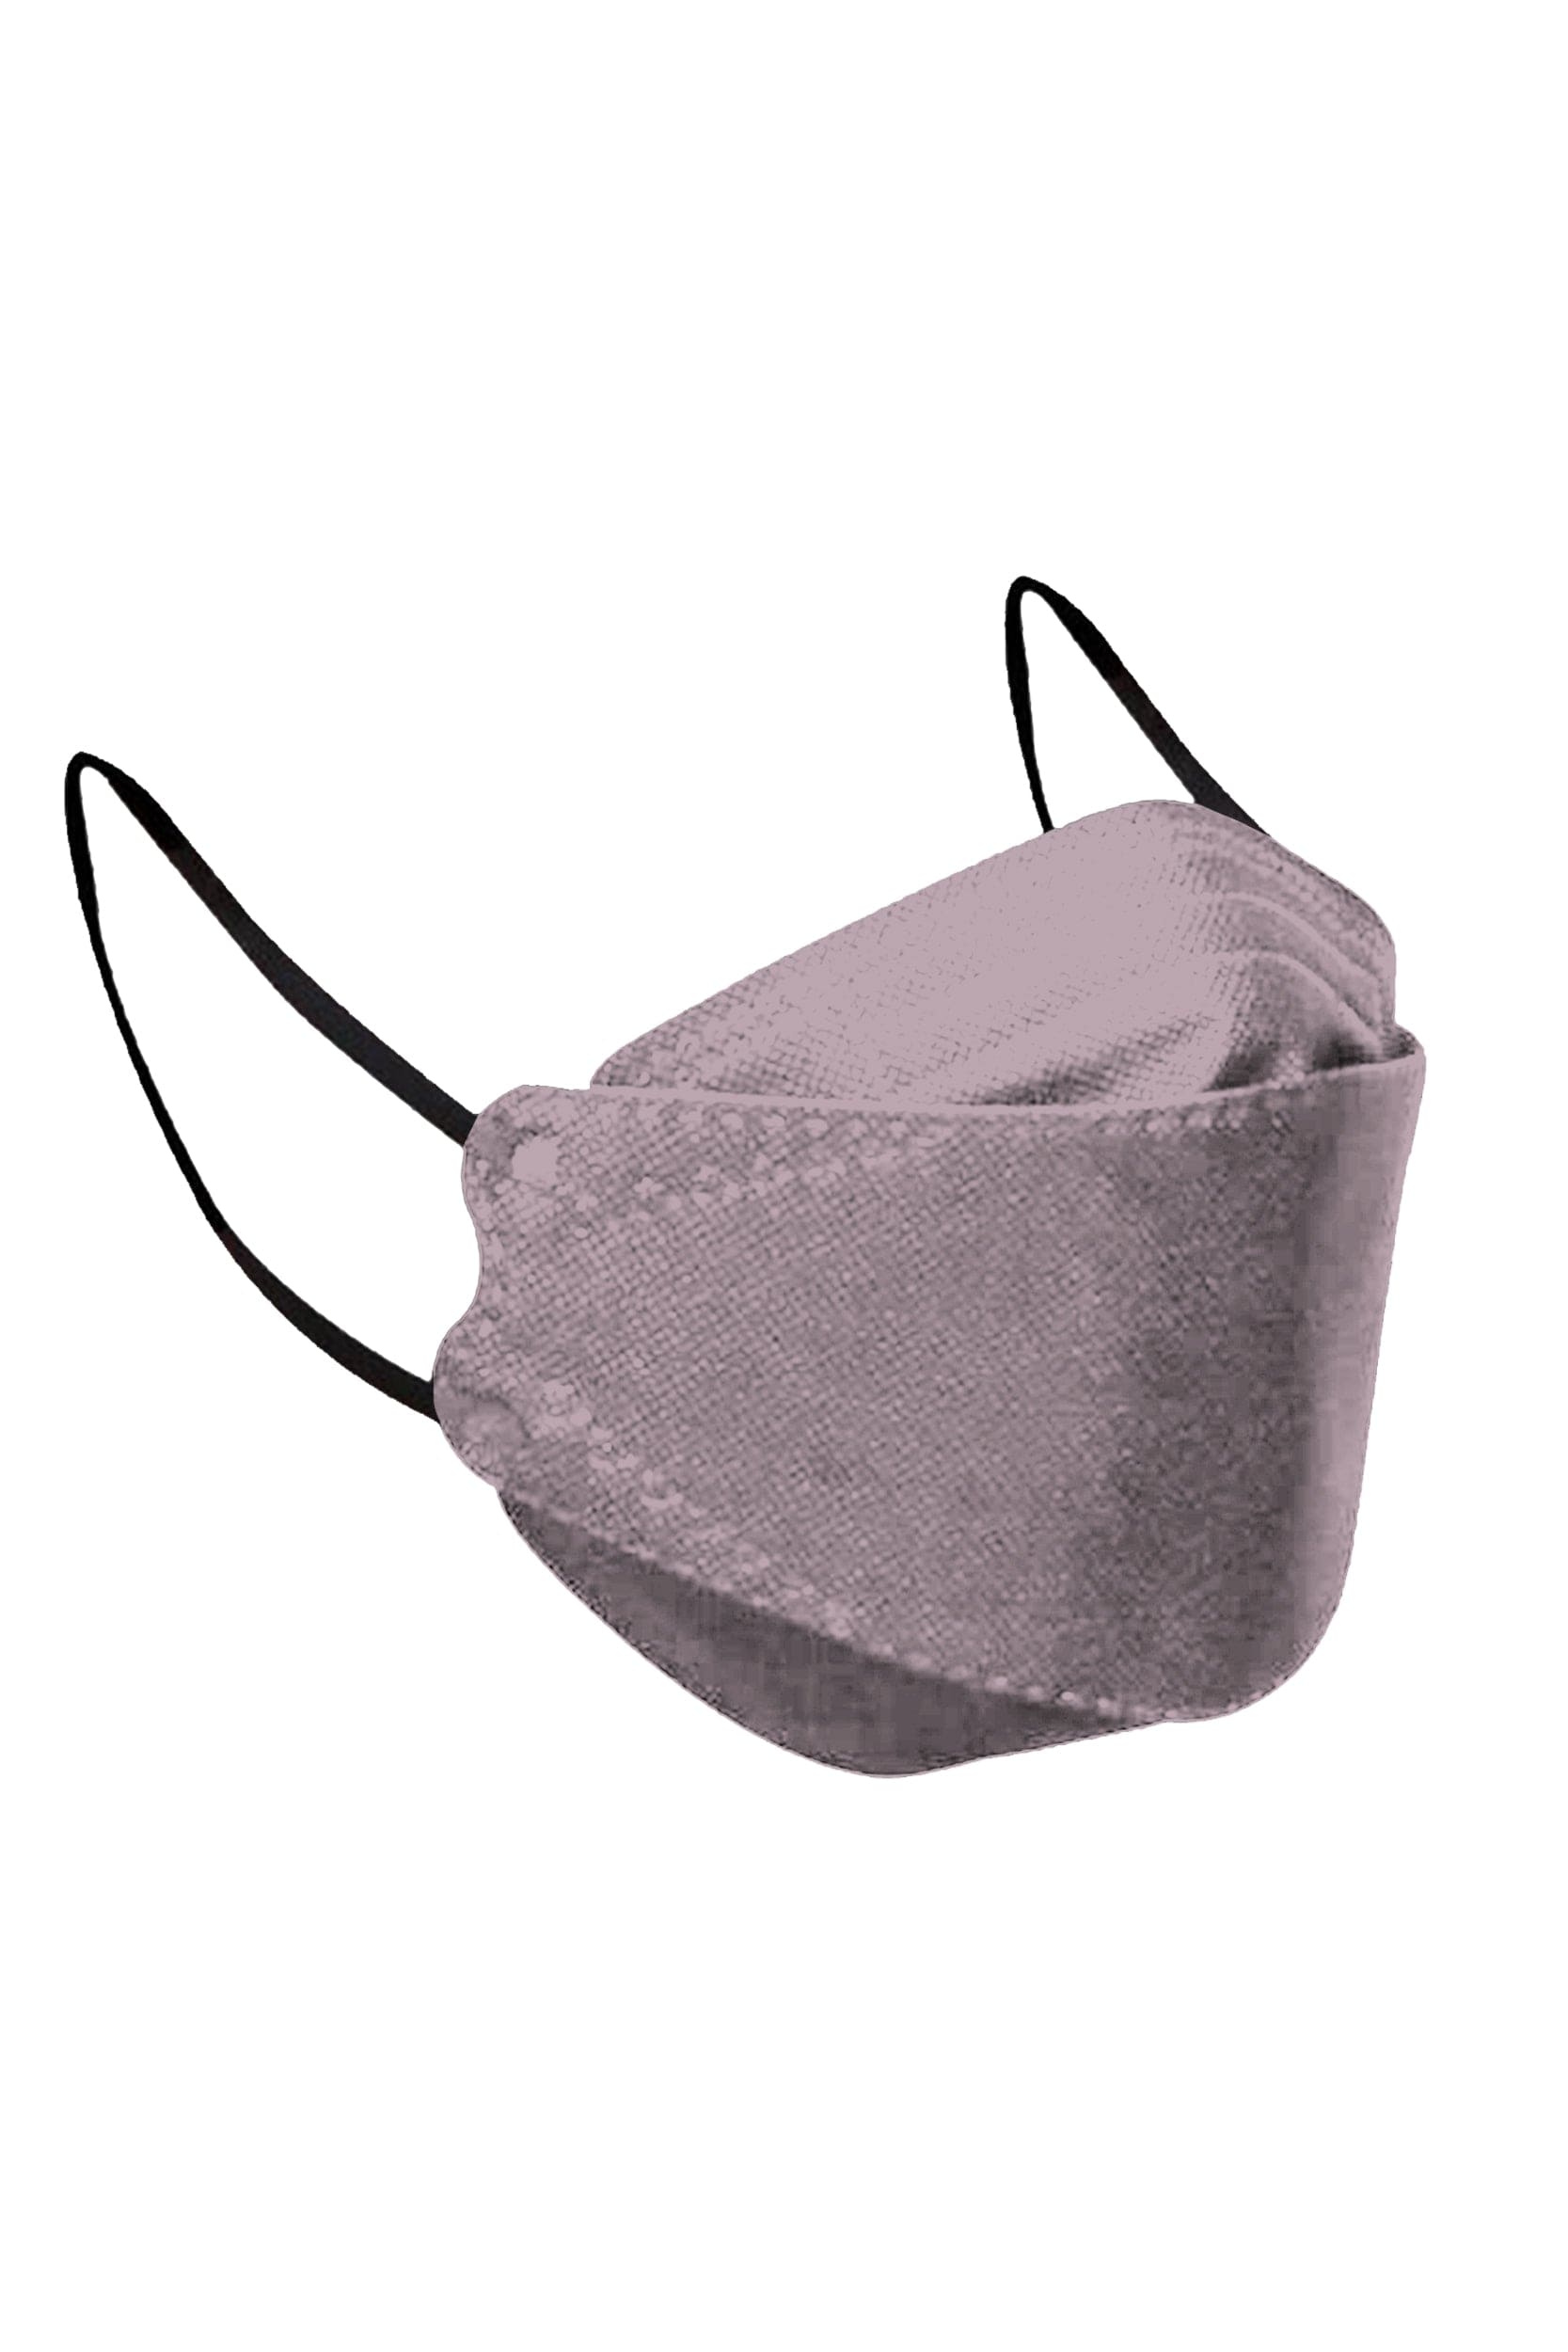 Stylish pink KF94 face mask, with soft black ear loops and high quality fabric. 